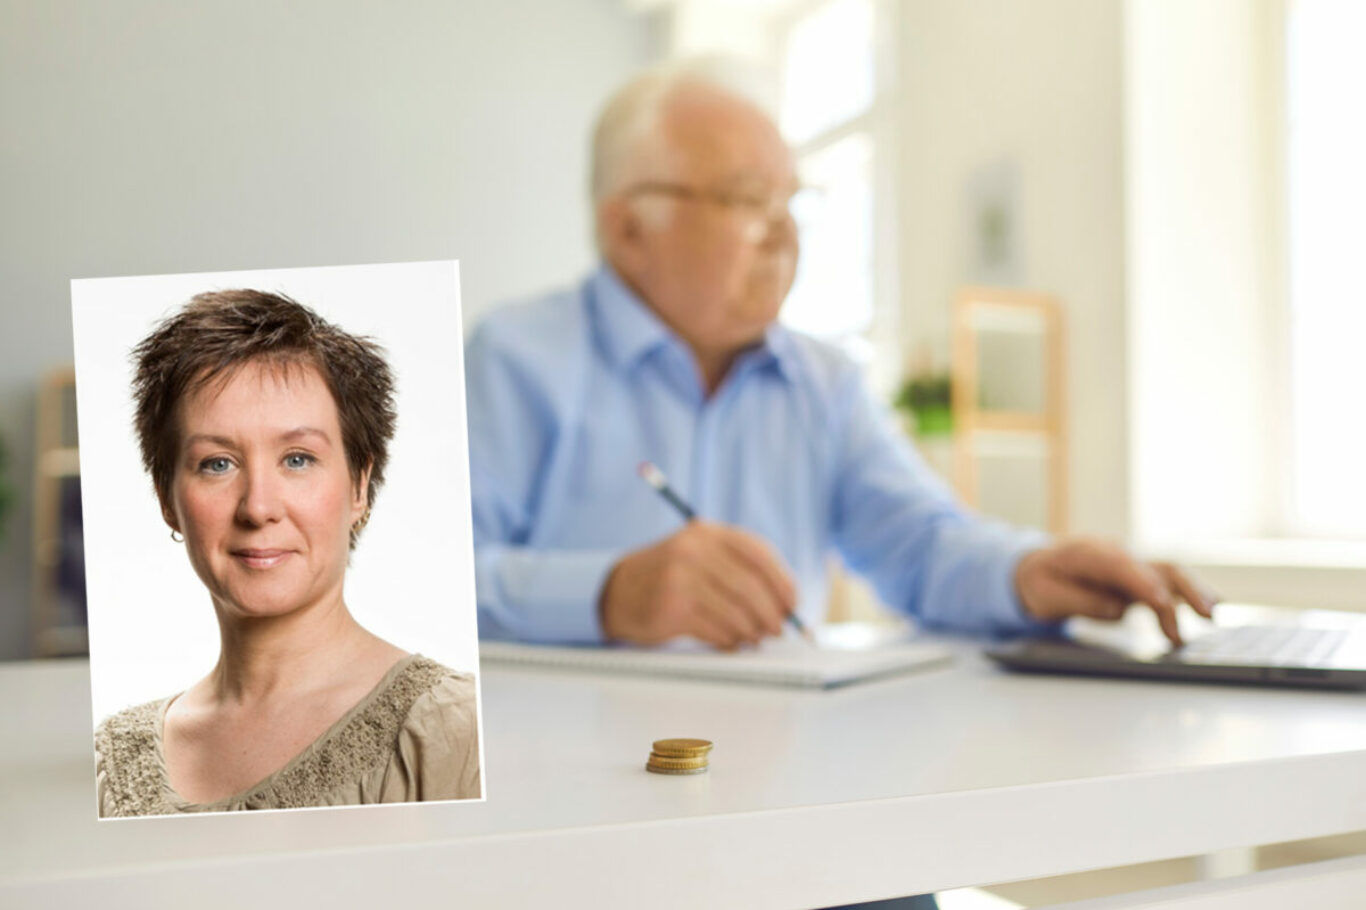 Piggy bank in soft focus on desk with blurred elderly man using laptop to fill out Internet pension application, do accounting and paperwork at home, manage personal finance or pay bills online